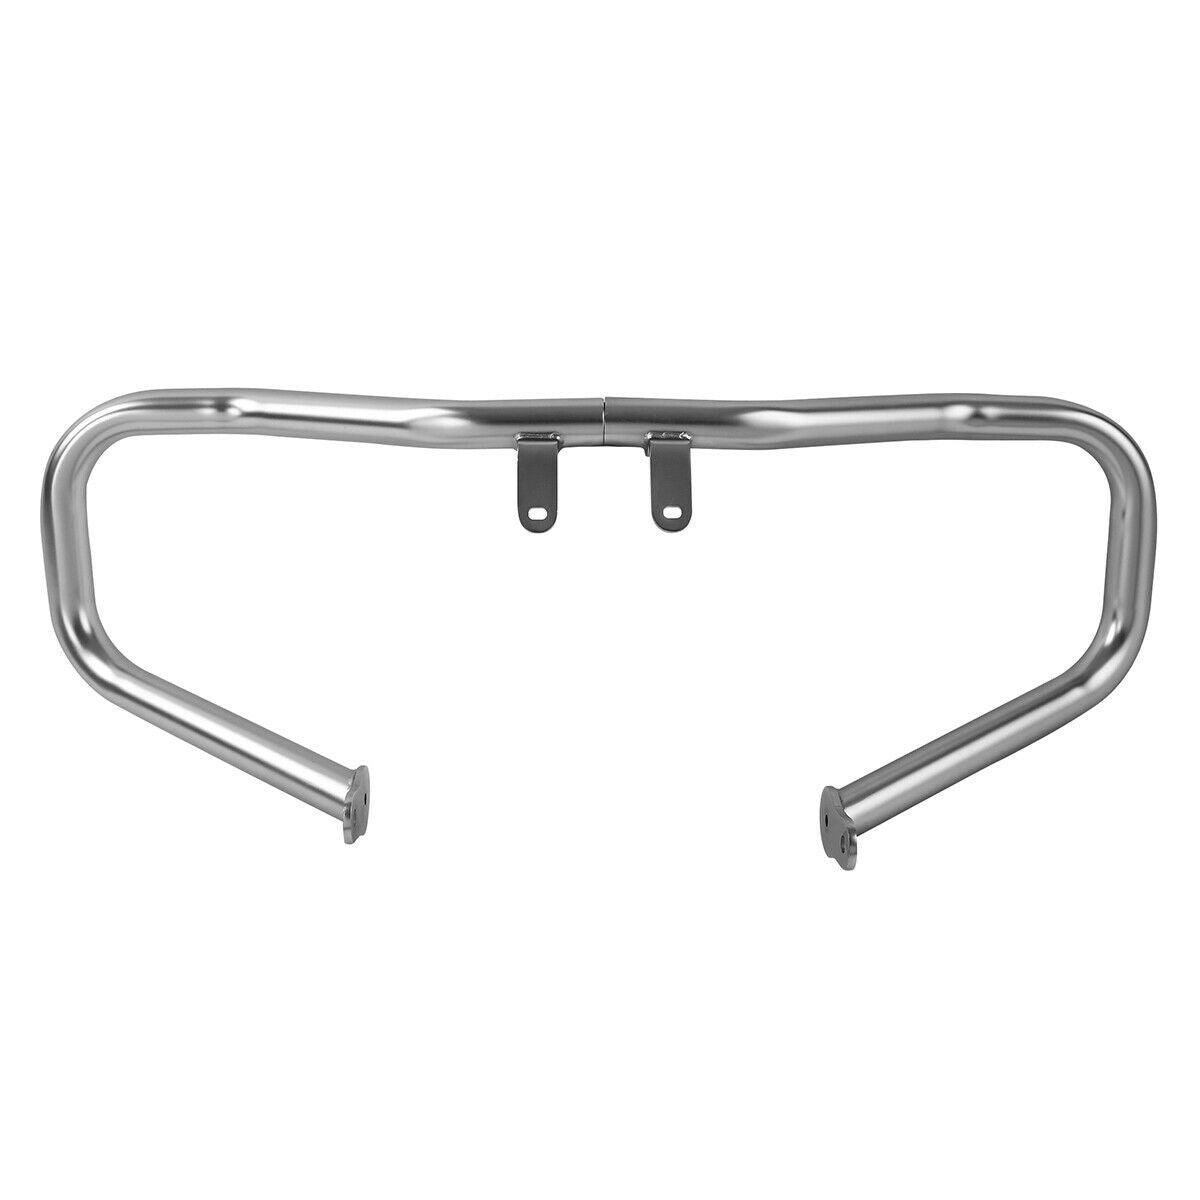 Chopped Engine Guard Highway Crash Bar Fit For Harley Touring FLHX FLHR 14-21 US - Moto Life Products